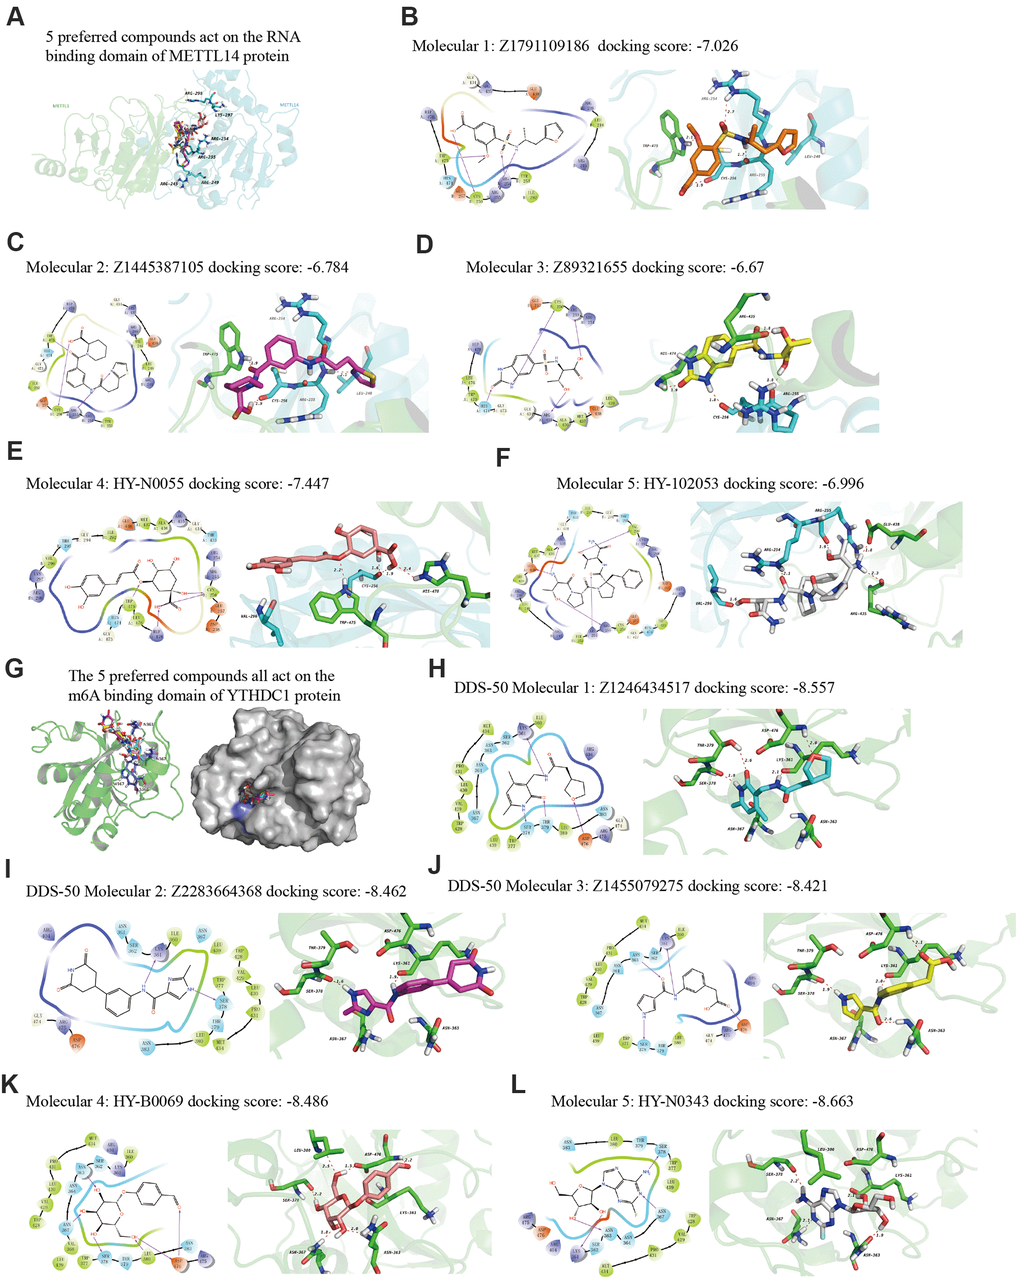 The 2D and 3D structures of five top-scoring small-molecule drugs. (A) Top five compounds acting on the RNA-binding domain of METTL14. (B–F) 2D and 3D mapping of the binding interaction between the top five compounds (Z1791109186, Z1445387105, Z89321655, HY-N0055, and HY-102053) and METTL14. (G) The five preferred compounds targeting the m6A-binding domain of the YTHDC1 protein. (H–L) 2D and 3D mapping of the binding between the top five compounds (Z1246434517, Z2283664368, Z1455079275, HY-N0343, and HY-B0069) and YTHDC1.